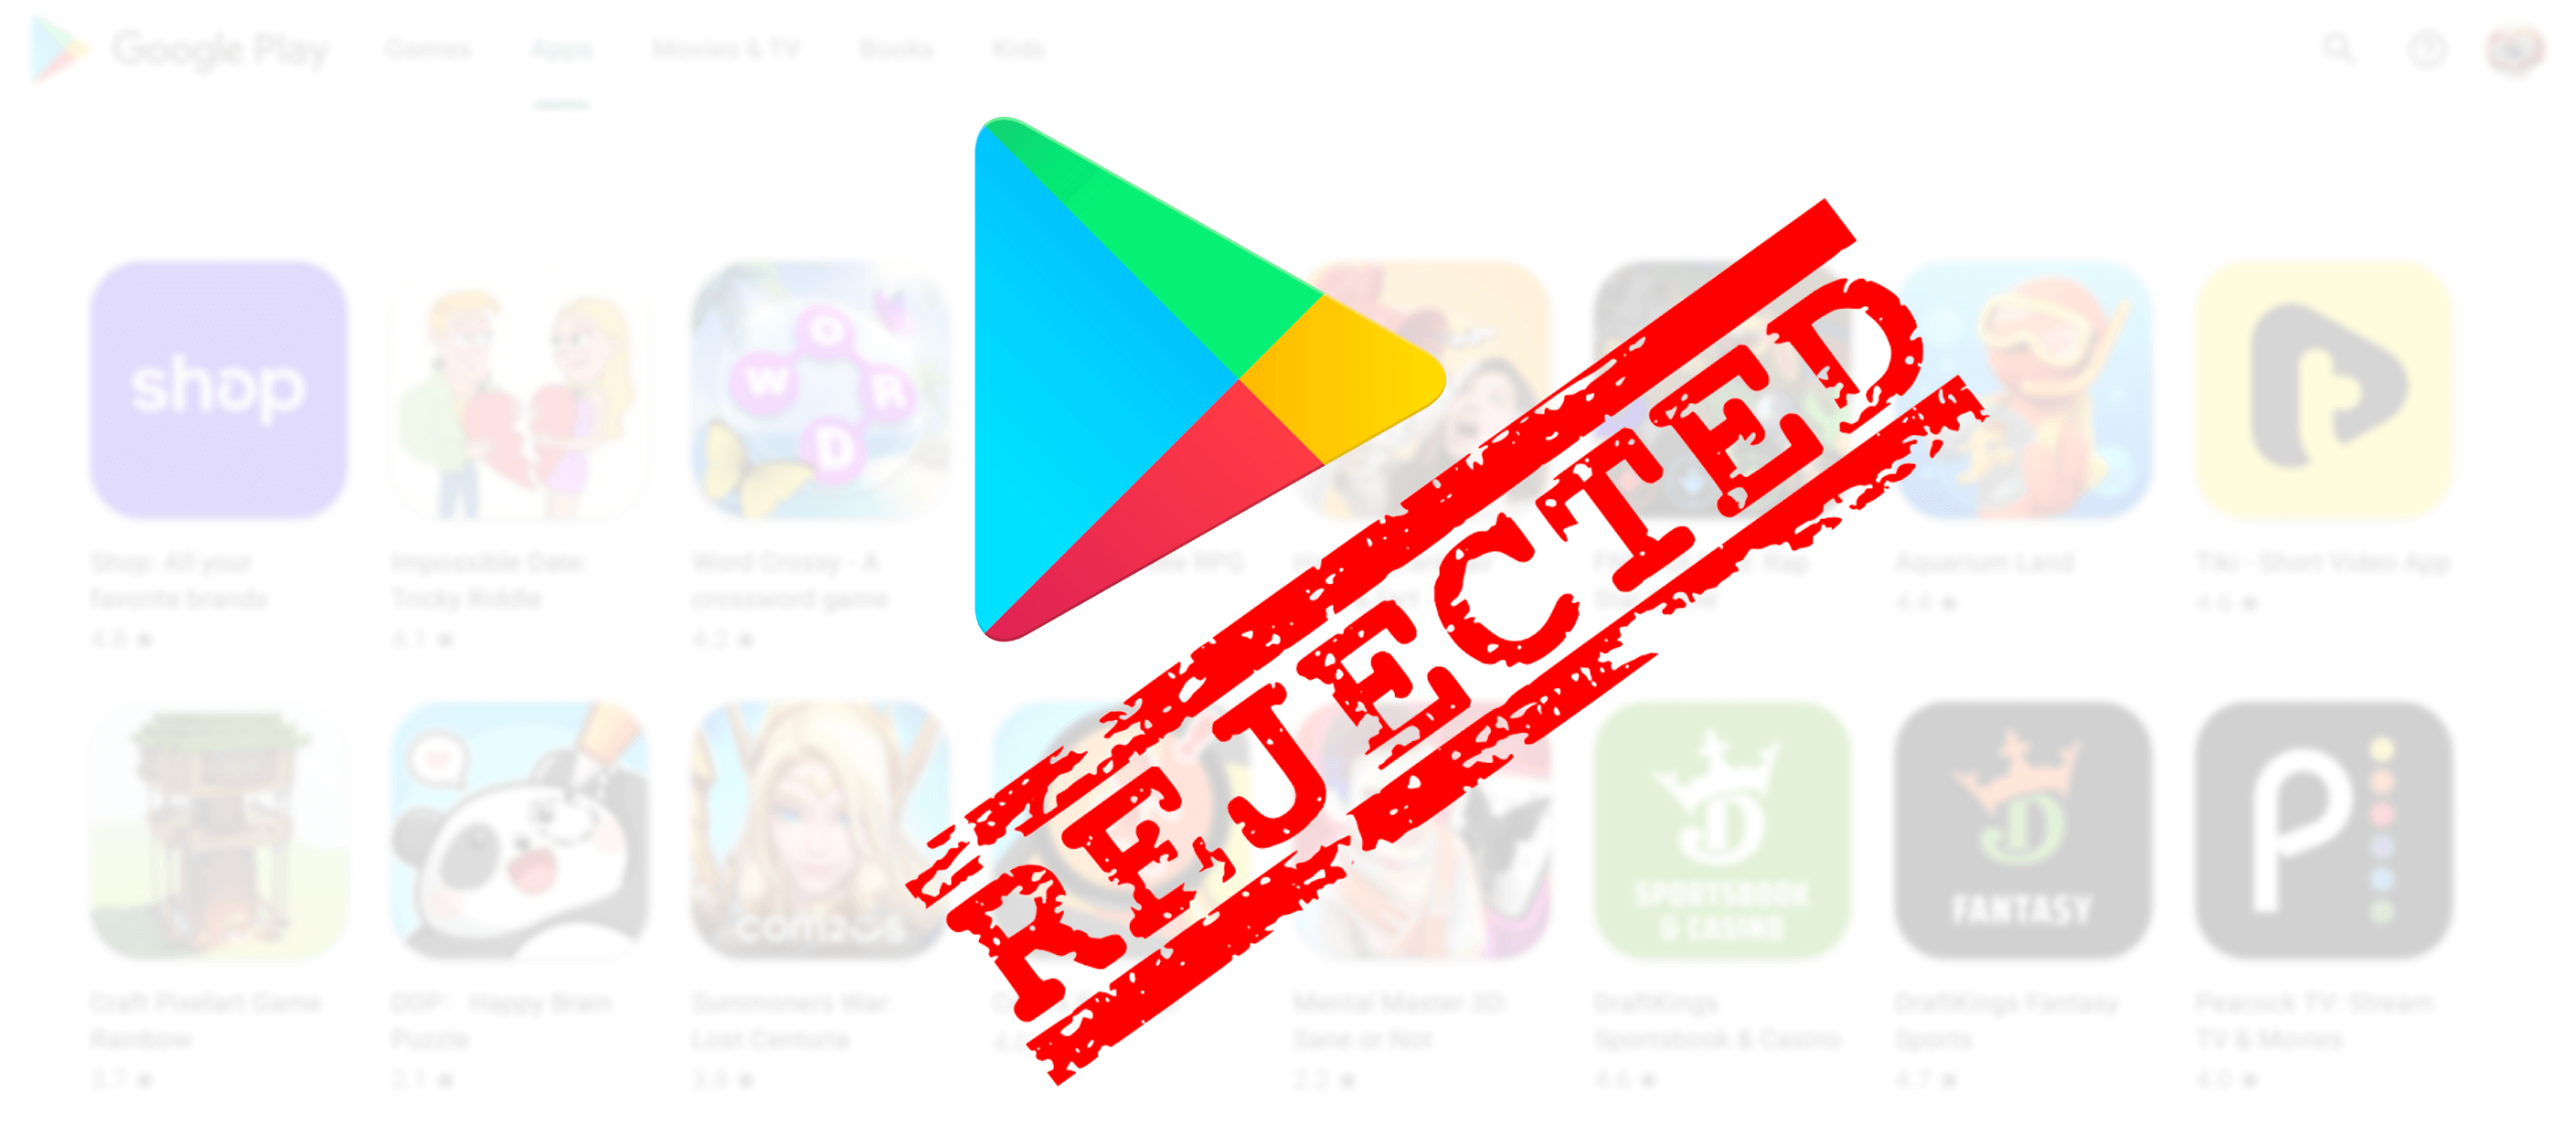 Apps Rejected By The Play Store